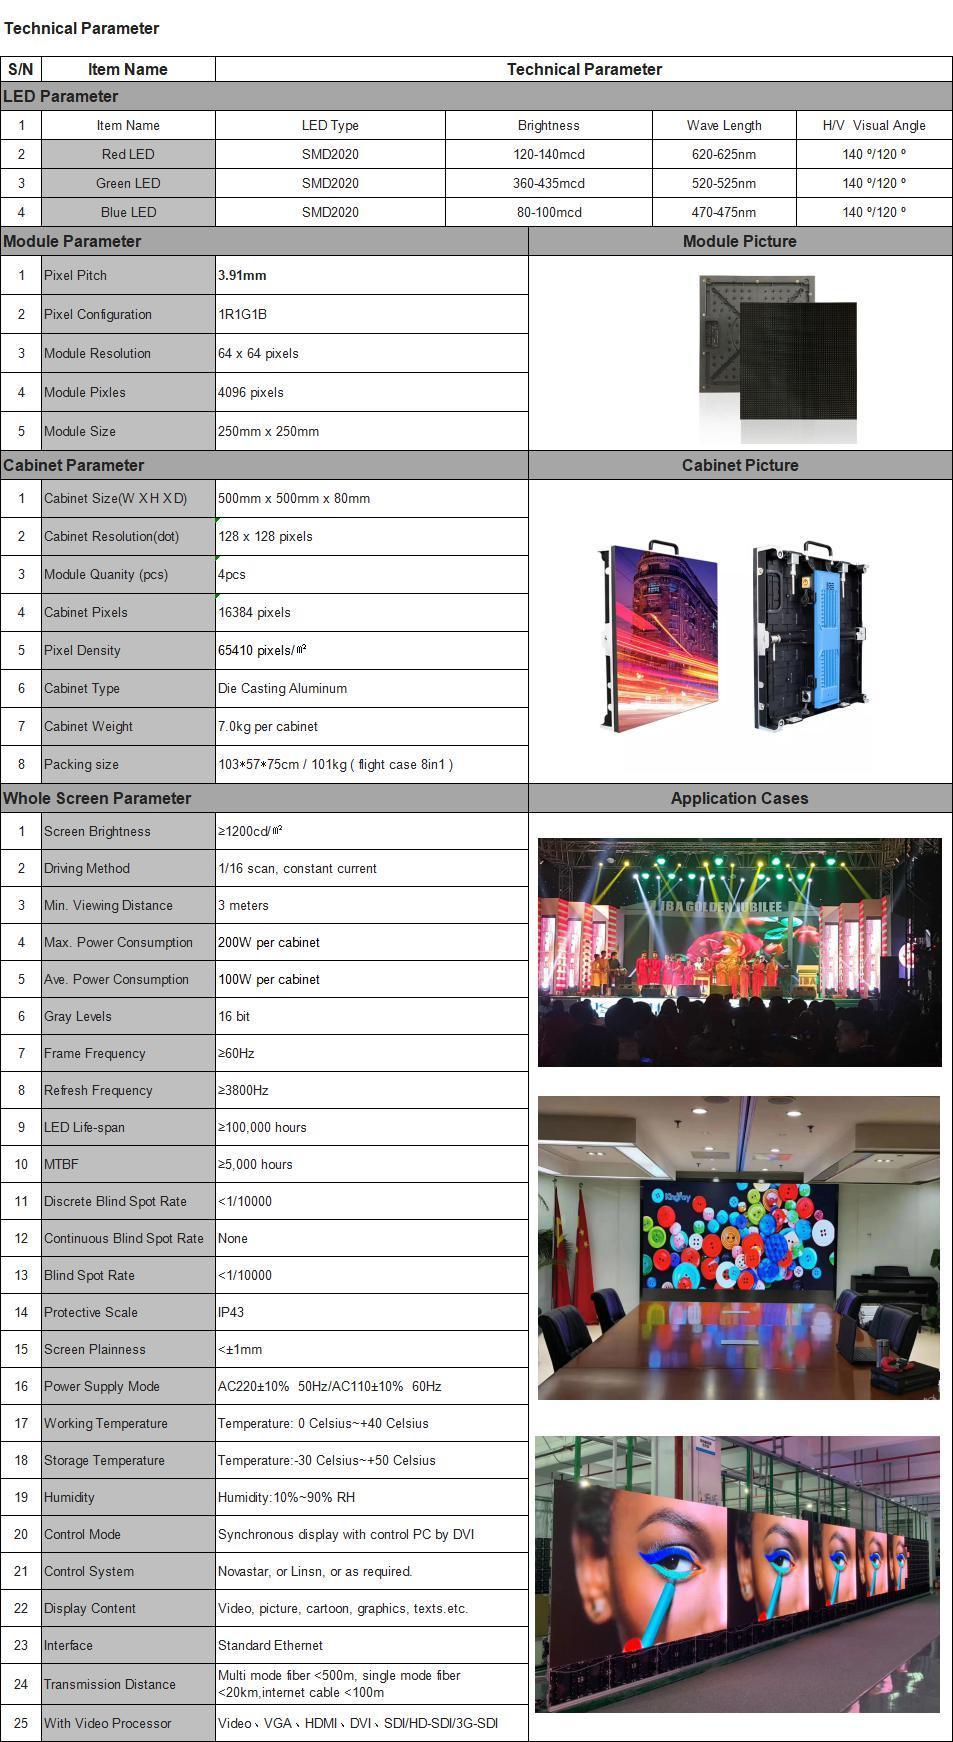 P3.91 Stage Backdrop Lighting Stage Decoration Wall Rental LED Screens